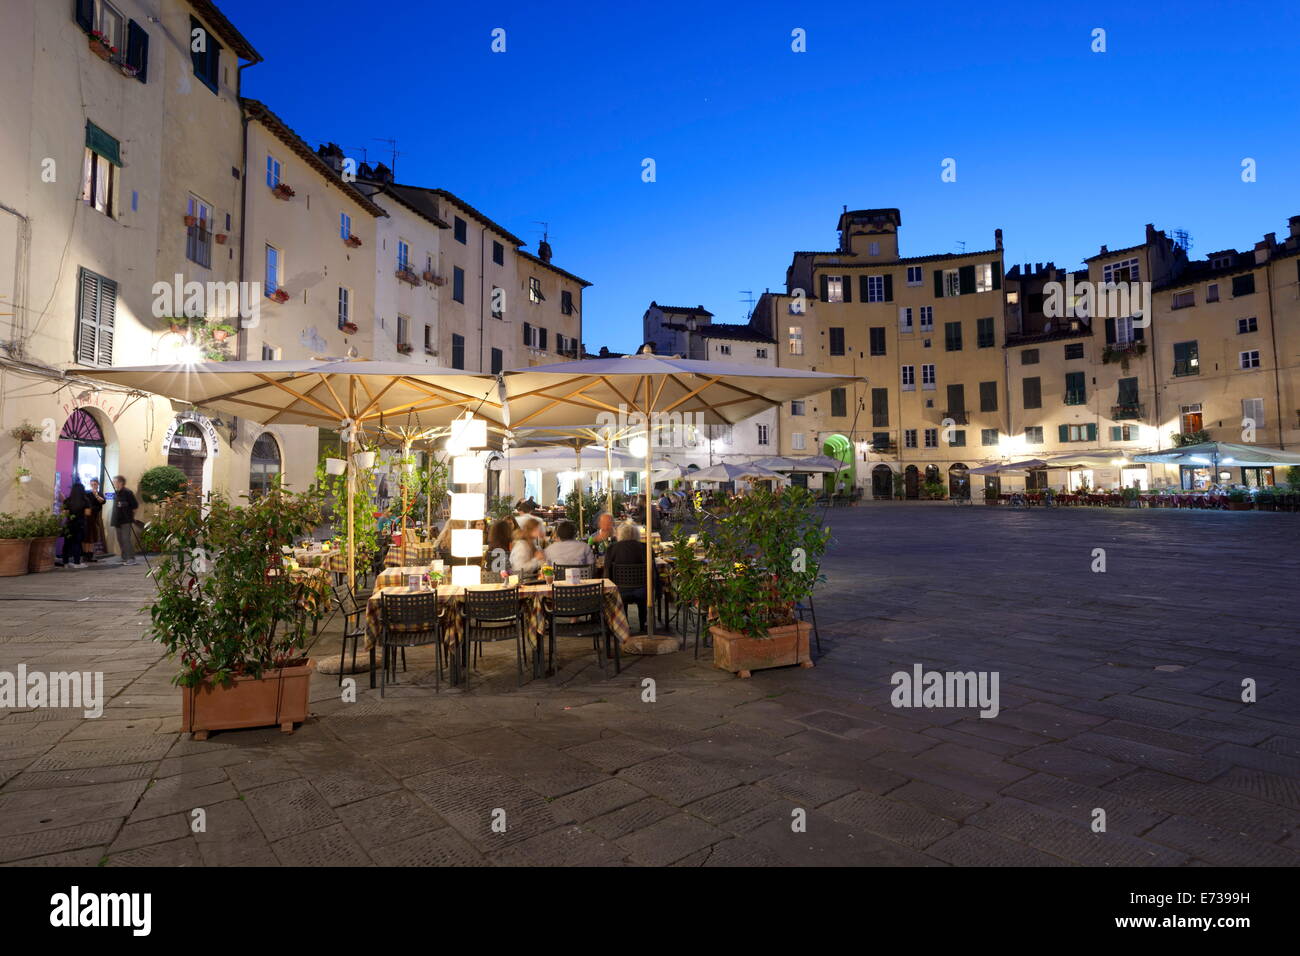 Restaurants in the evening in the Piazza Anfiteatro Romano, Lucca, Tuscany, Italy, Europe Stock Photo